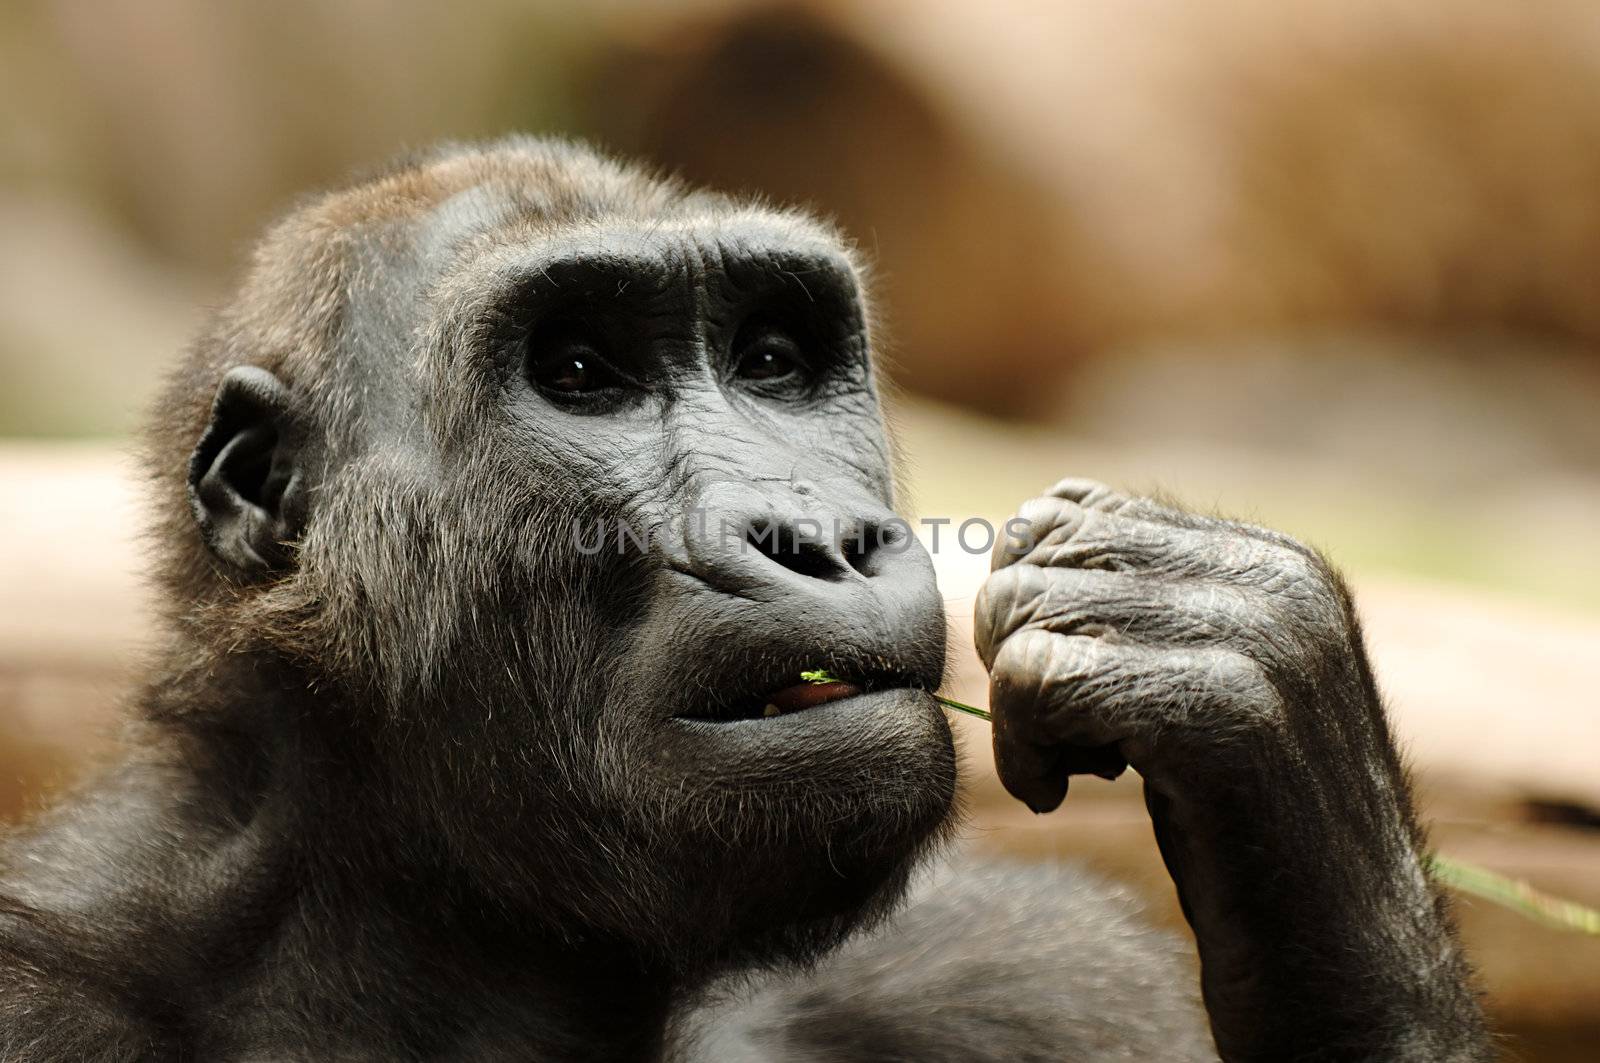 Ape is sitting and eating grass